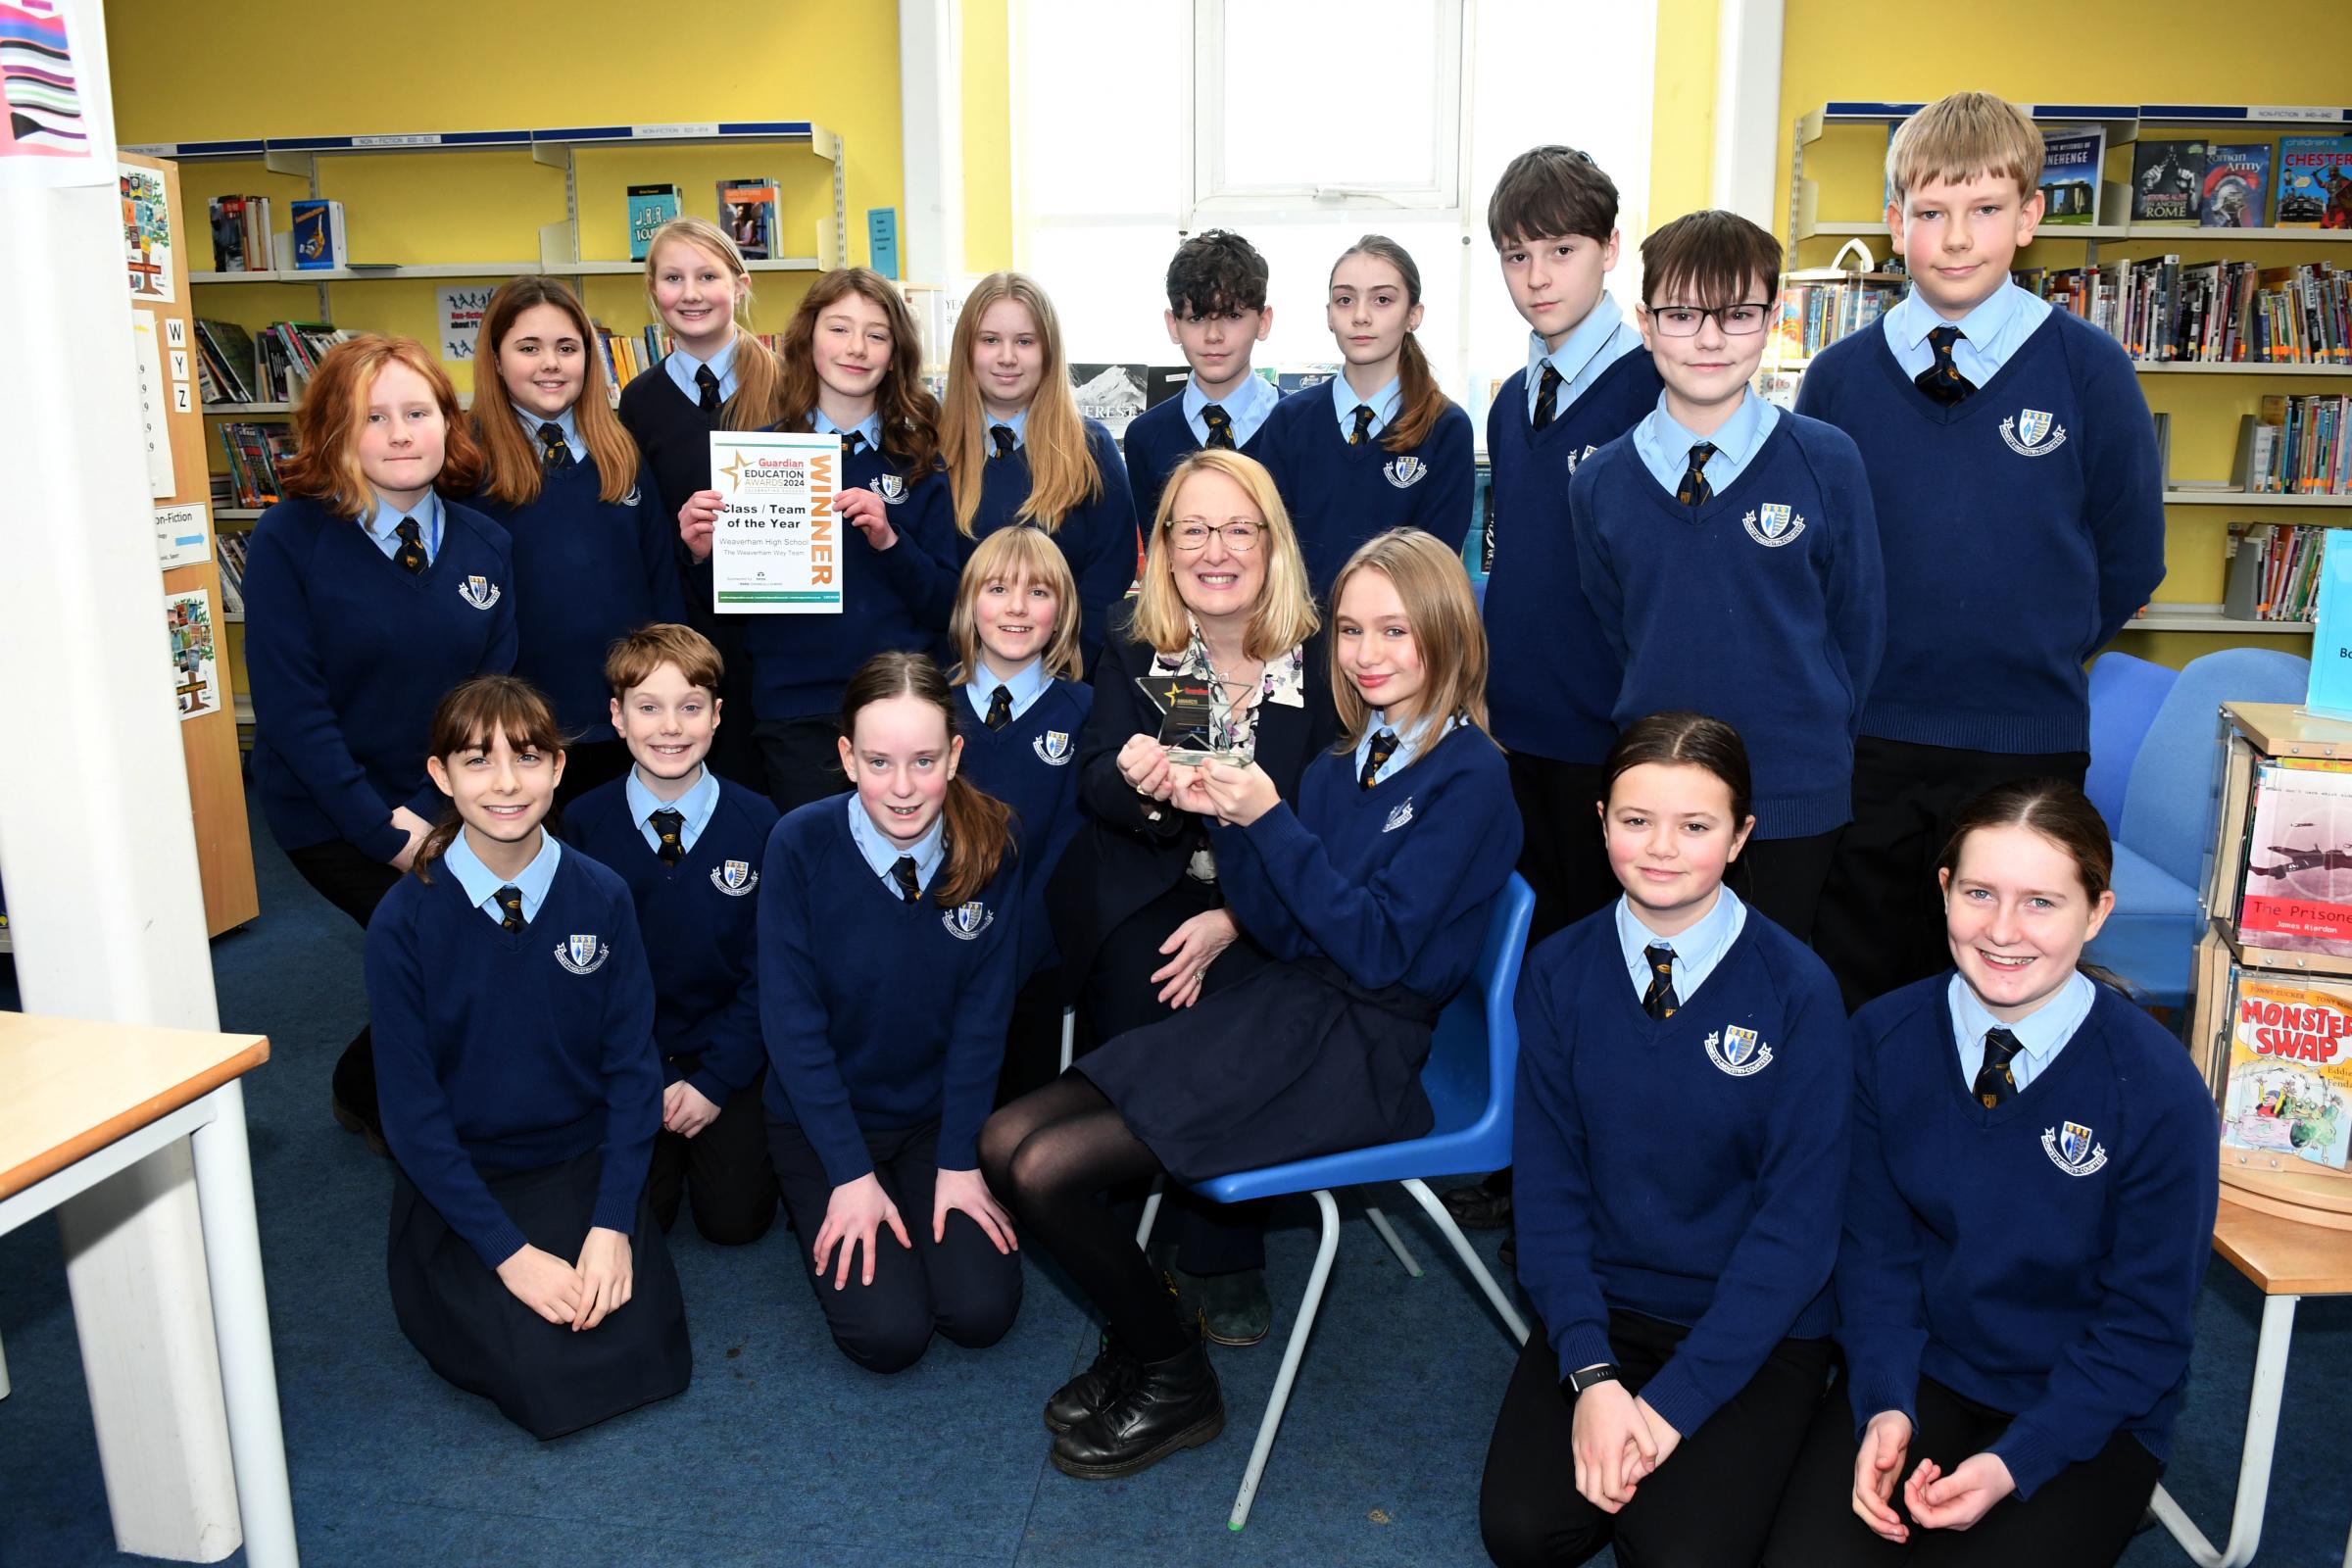 Pauline Yould from Tata Chemicals and the Team of the Year at Weaverham High School